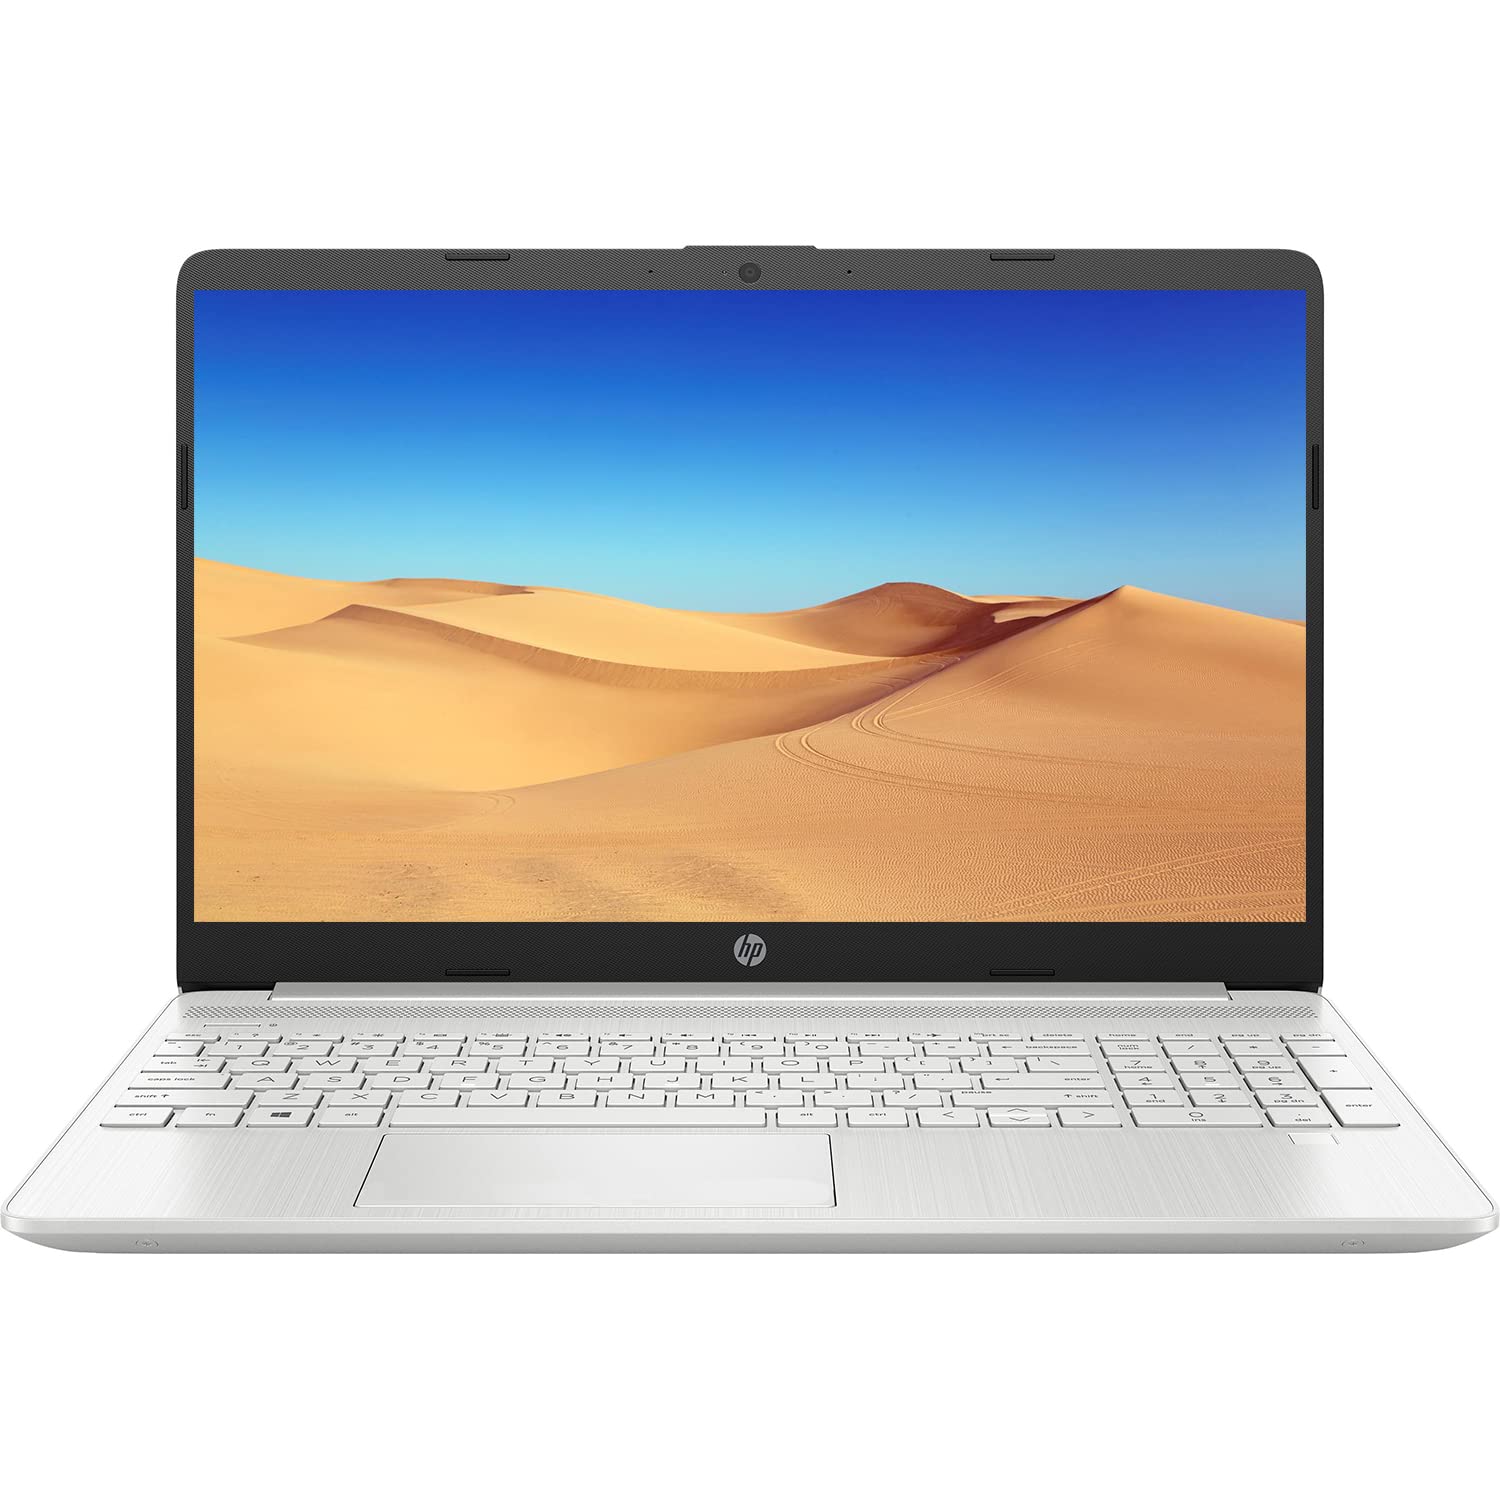 You are currently viewing An Excellent Overview of HP 15 inch Laptop, FHD Display, Intel Core i3